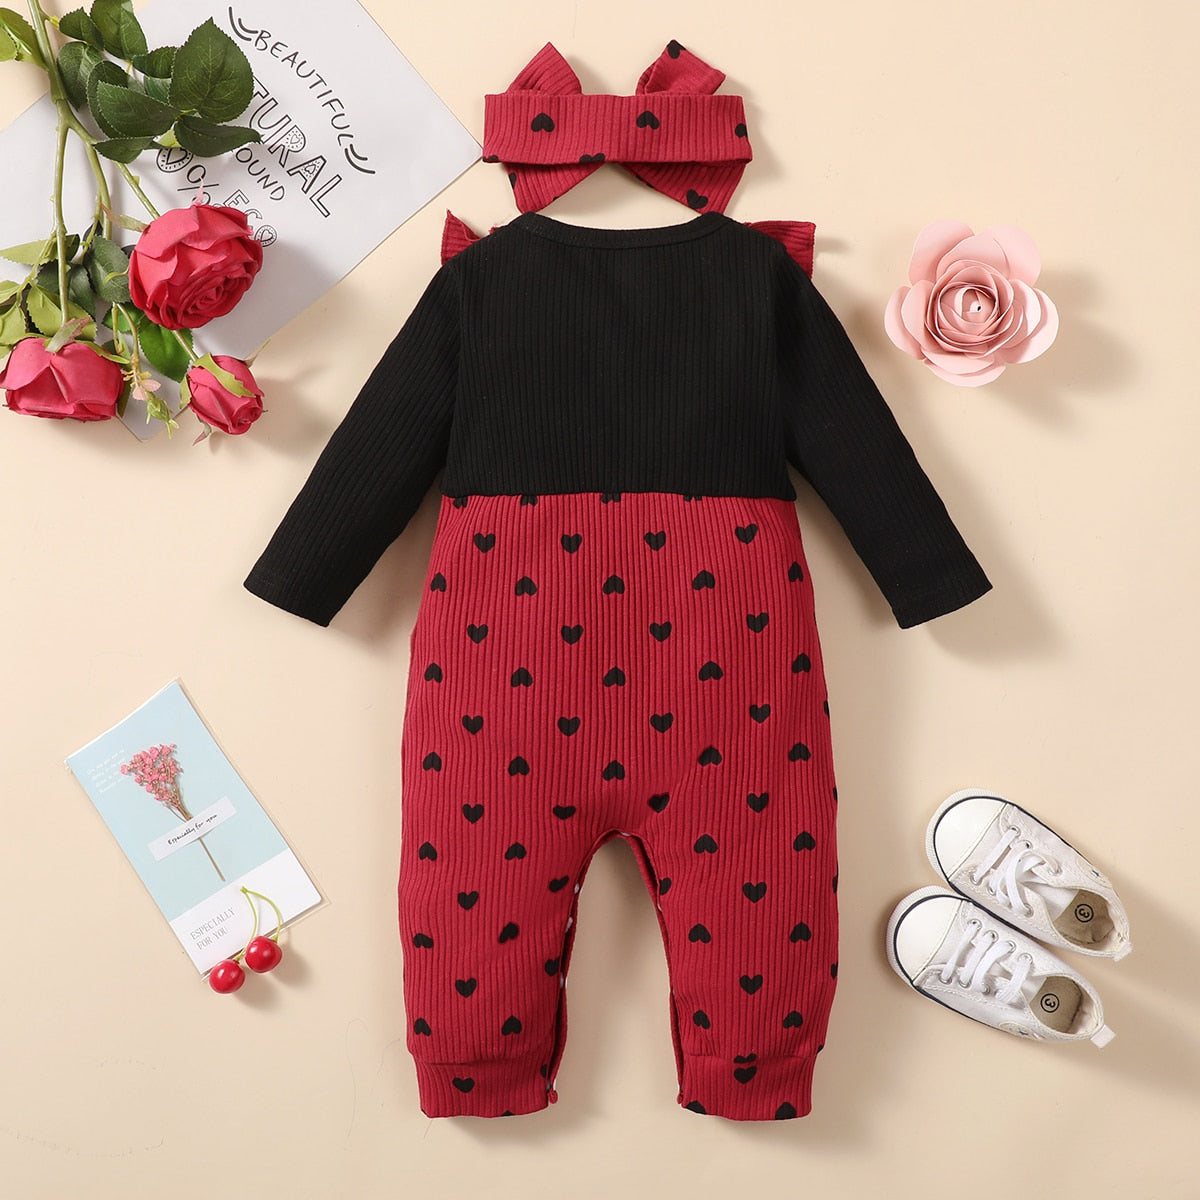 Baby Girls Romper Bow Fashion Cotton Long Sleeves Printed Jumpsuit